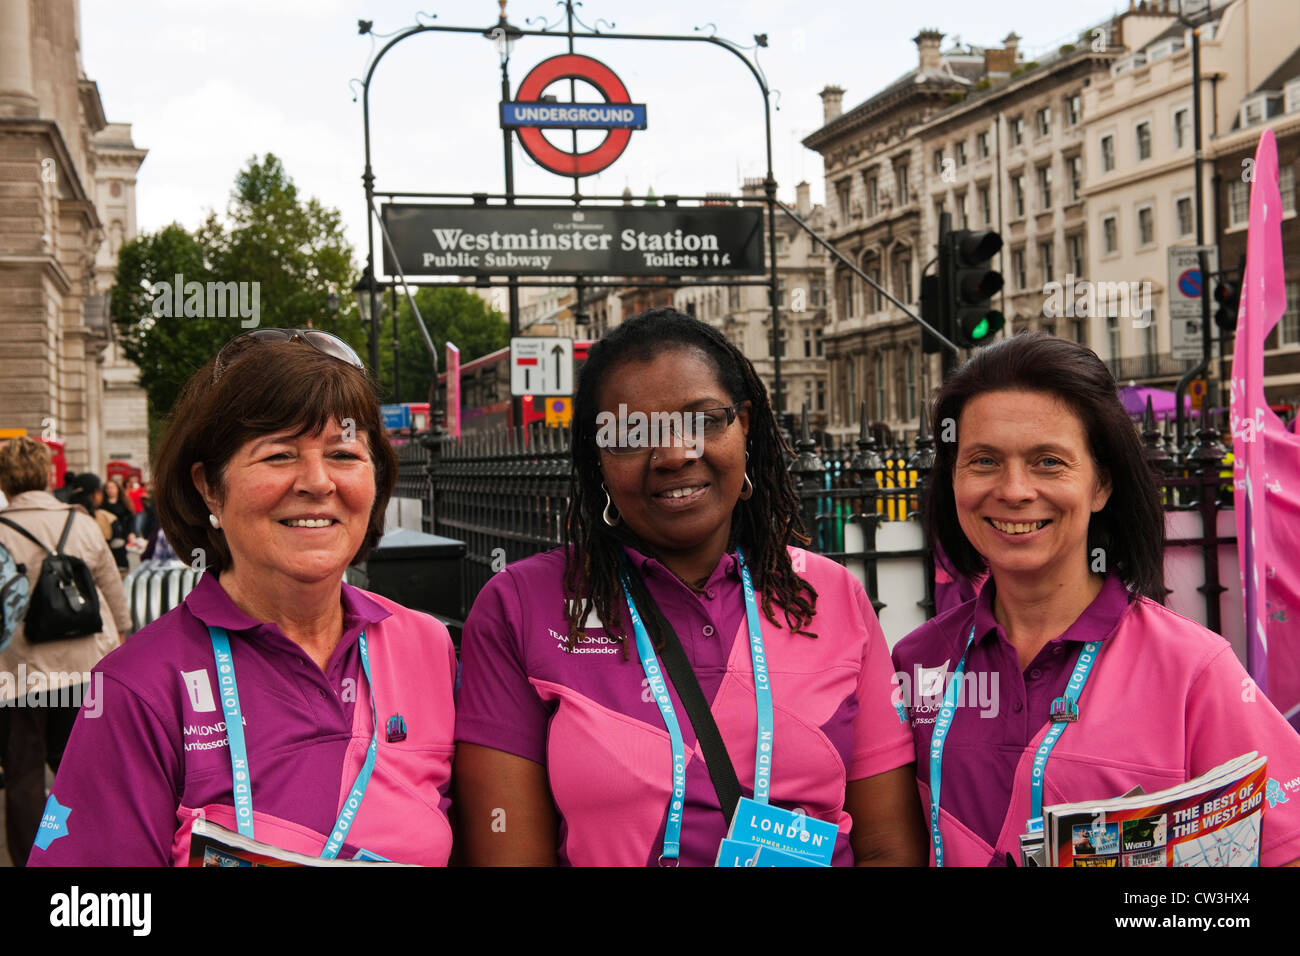 Smiling volunteer ambassadors for the 2012 Olympic games outside Westminster underground station in their distinctive uniforms Stock Photo